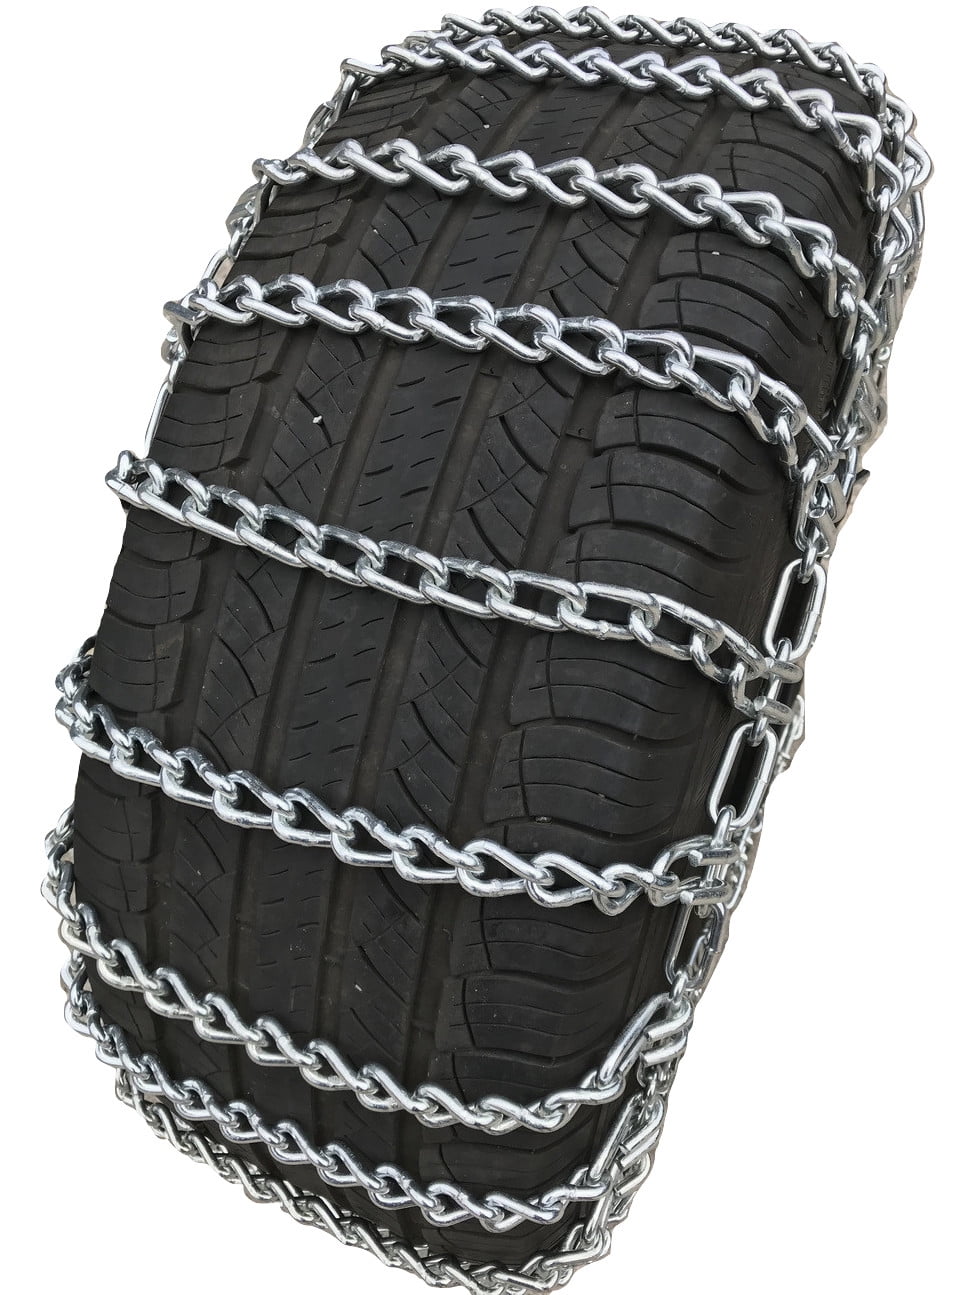 275/55 20 V-BAR Cam Tire Chains w/Spider Tensioners TireChain.com 275/55R20 